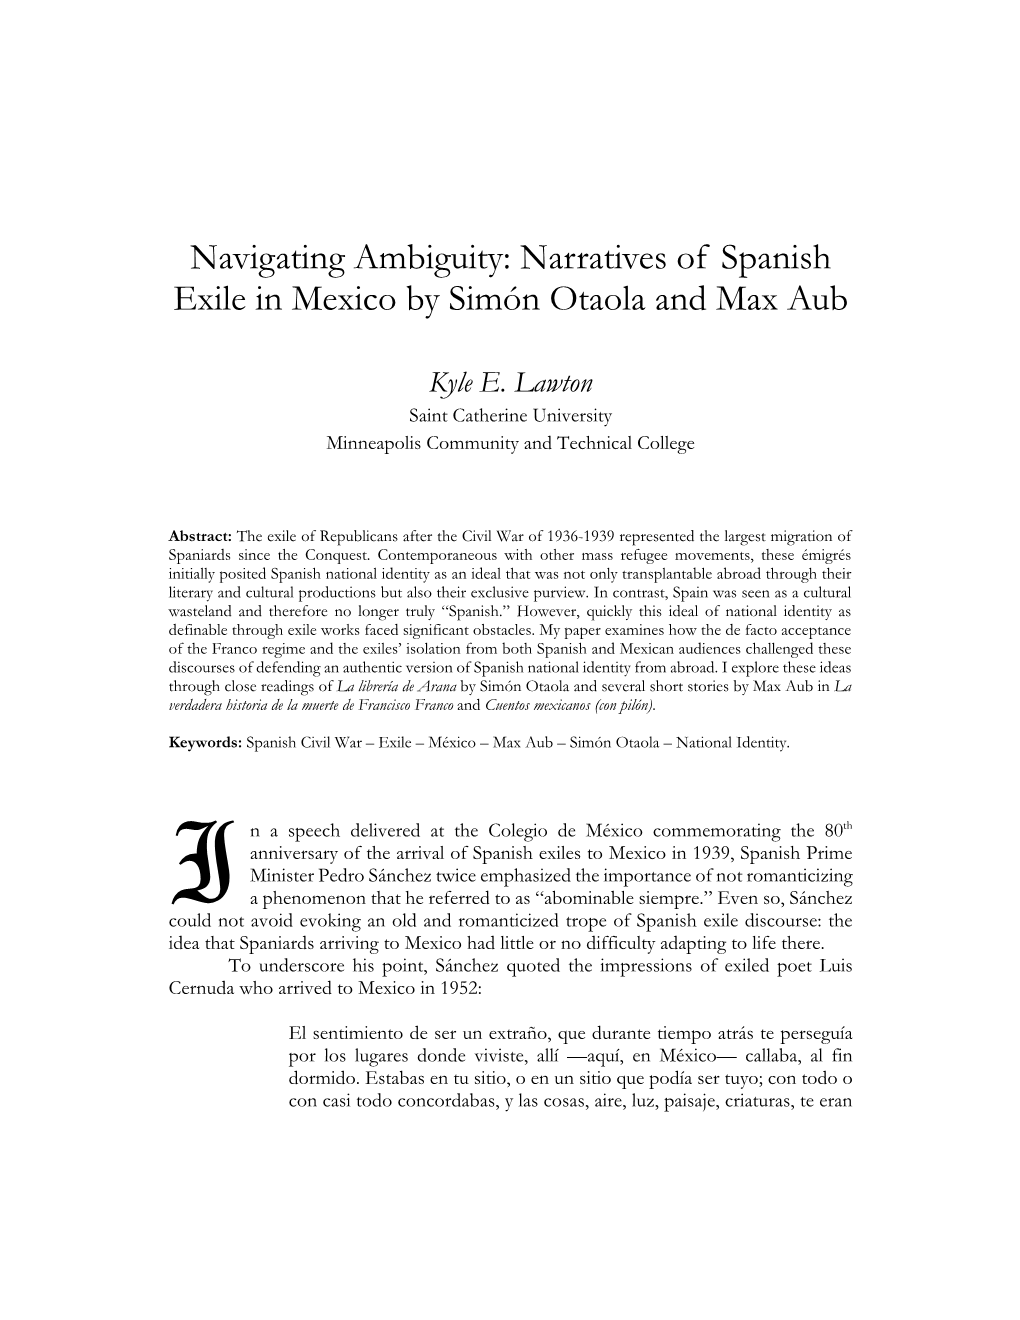 Narratives of Spanish Exile in Mexico by Simón Otaola and Max Aub